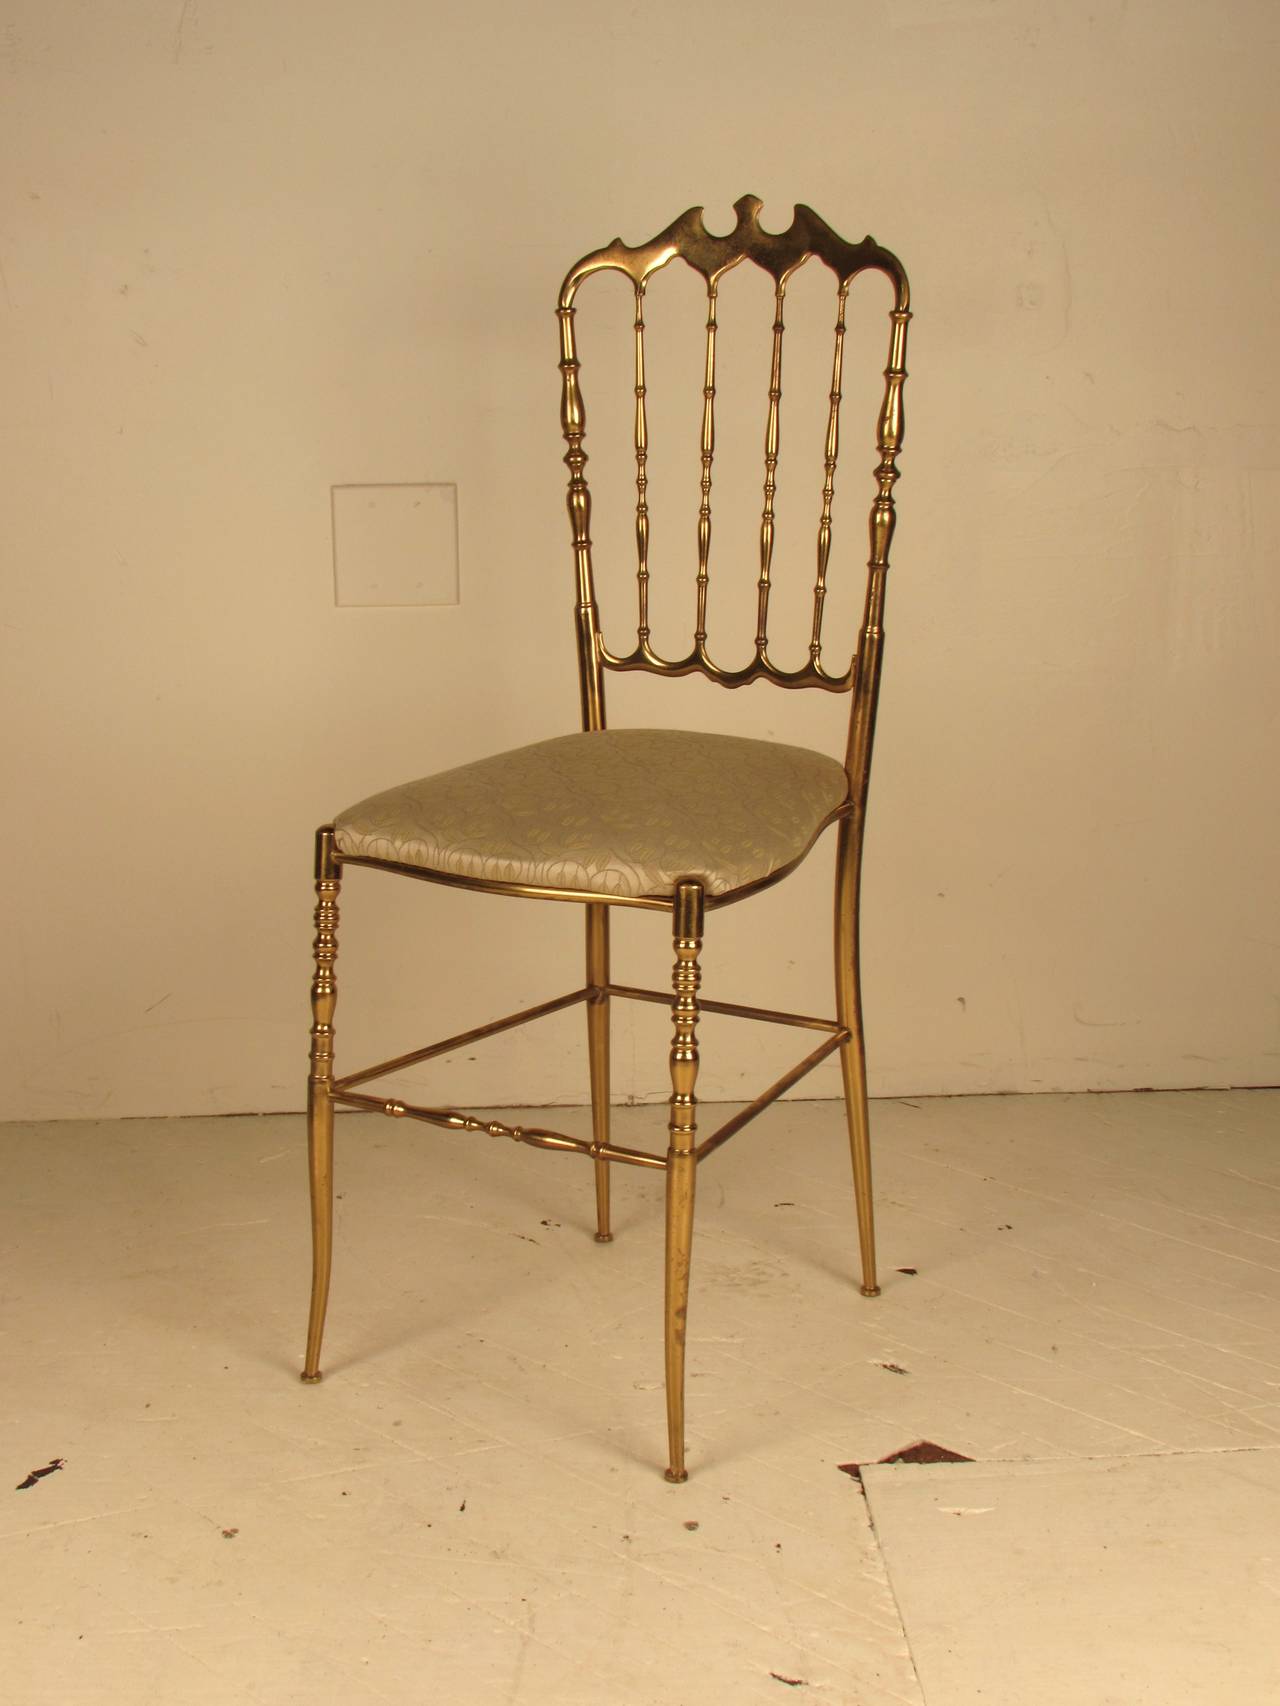 Brass chair designed by Giuseppe Gaetano Descalzi and handmade in Italy by Chiavari. Graceful, elegant lines would make this a lovely candidate to accompany a special vanity or desk. 
Brass is in overall very good condition and shows beautifully.